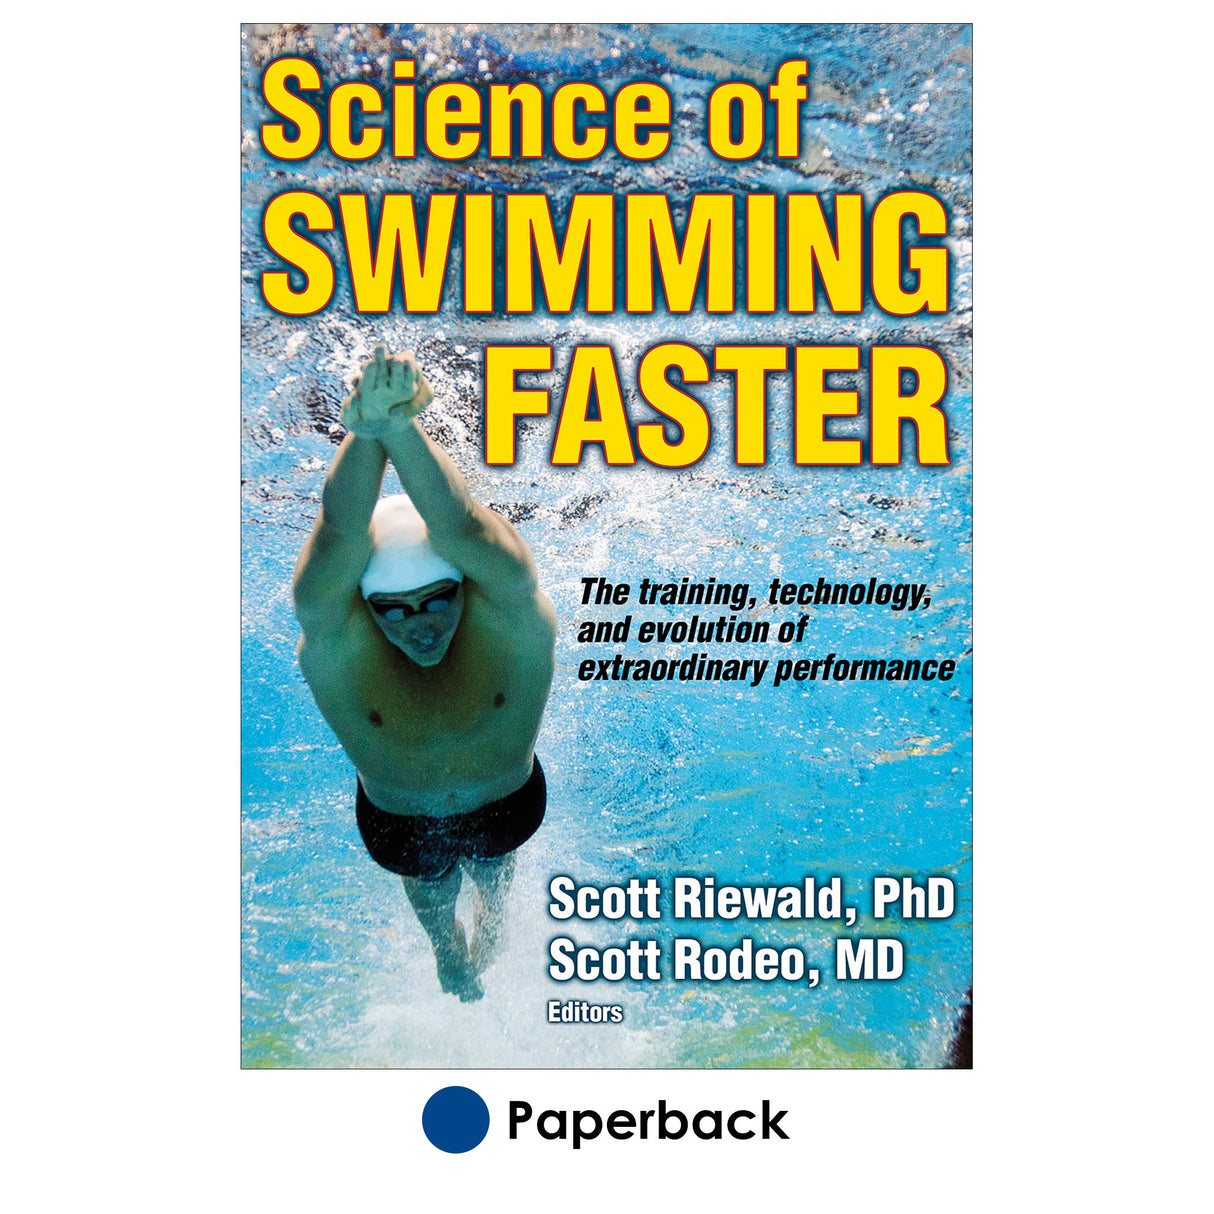 Science of Swimming Faster